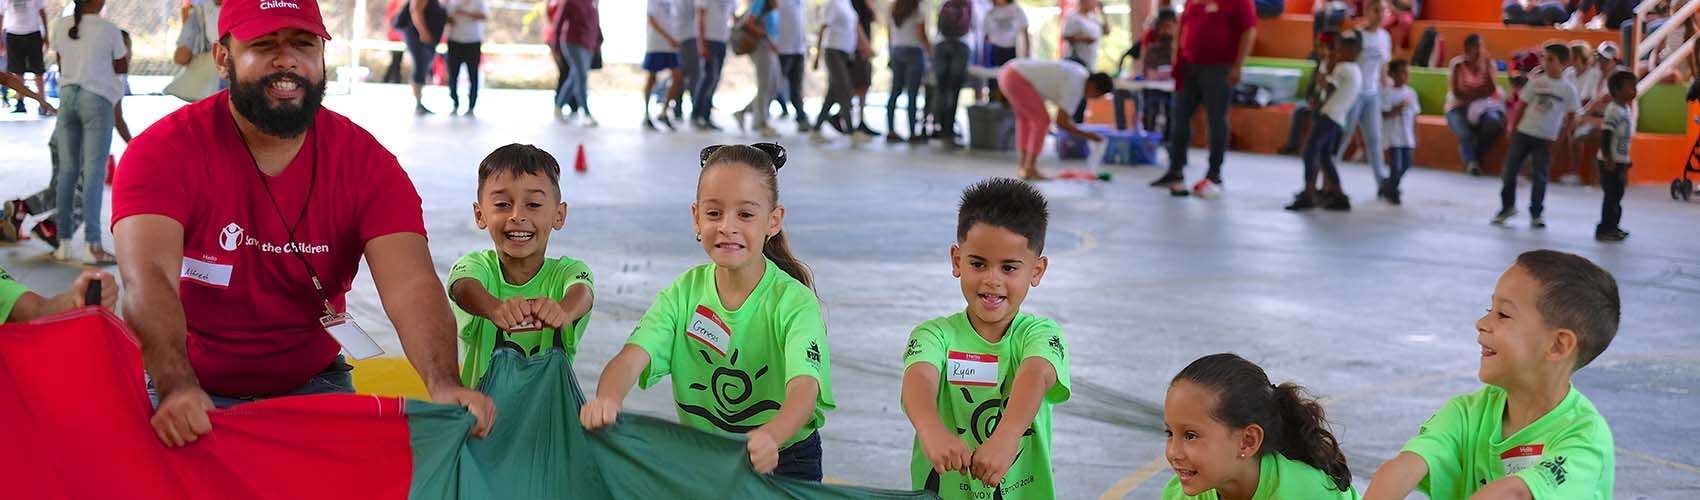 A group of children and Save the Children worker participate in Journey of Hope at the Mulitas Community Center in Puerto Rico, using the parachute to communicate their feelings following Hurricane Maria.